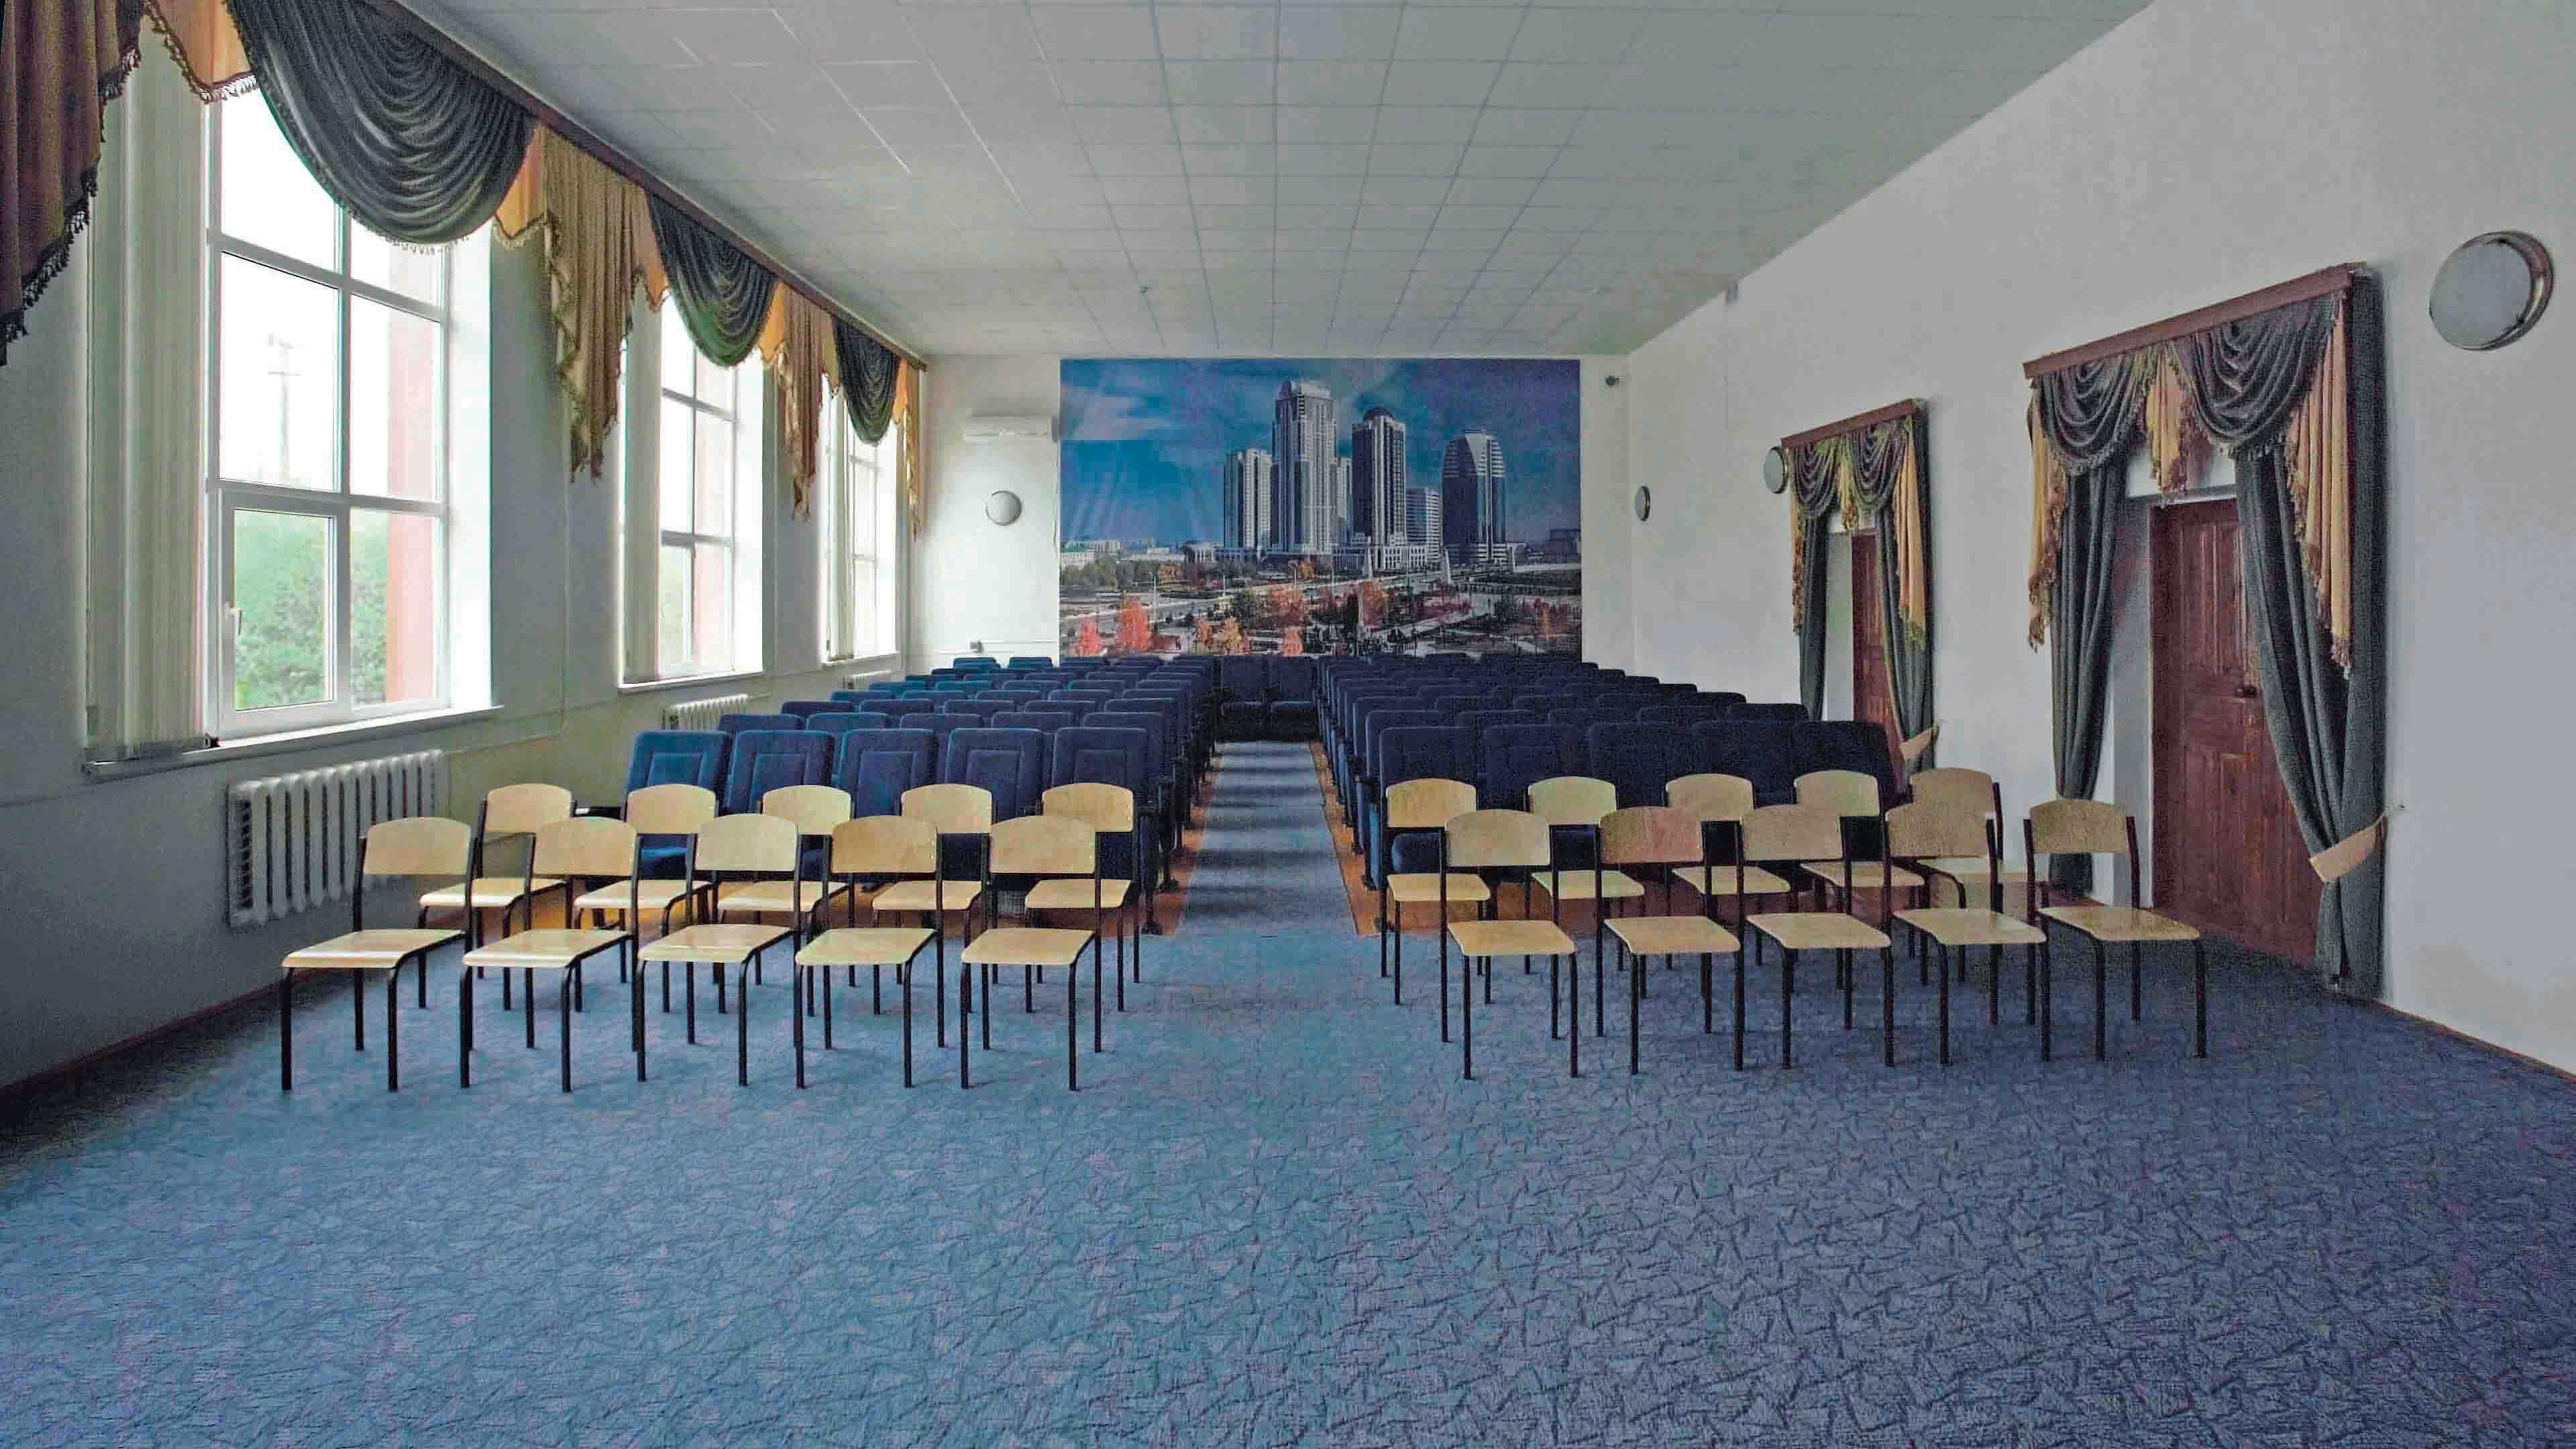 An image of a blue carpeted room filled with rows of chairs. A large photograph of a cityscape fills the back wall. Windows line the left wall, two doors are on the right. Both have ornate drapery